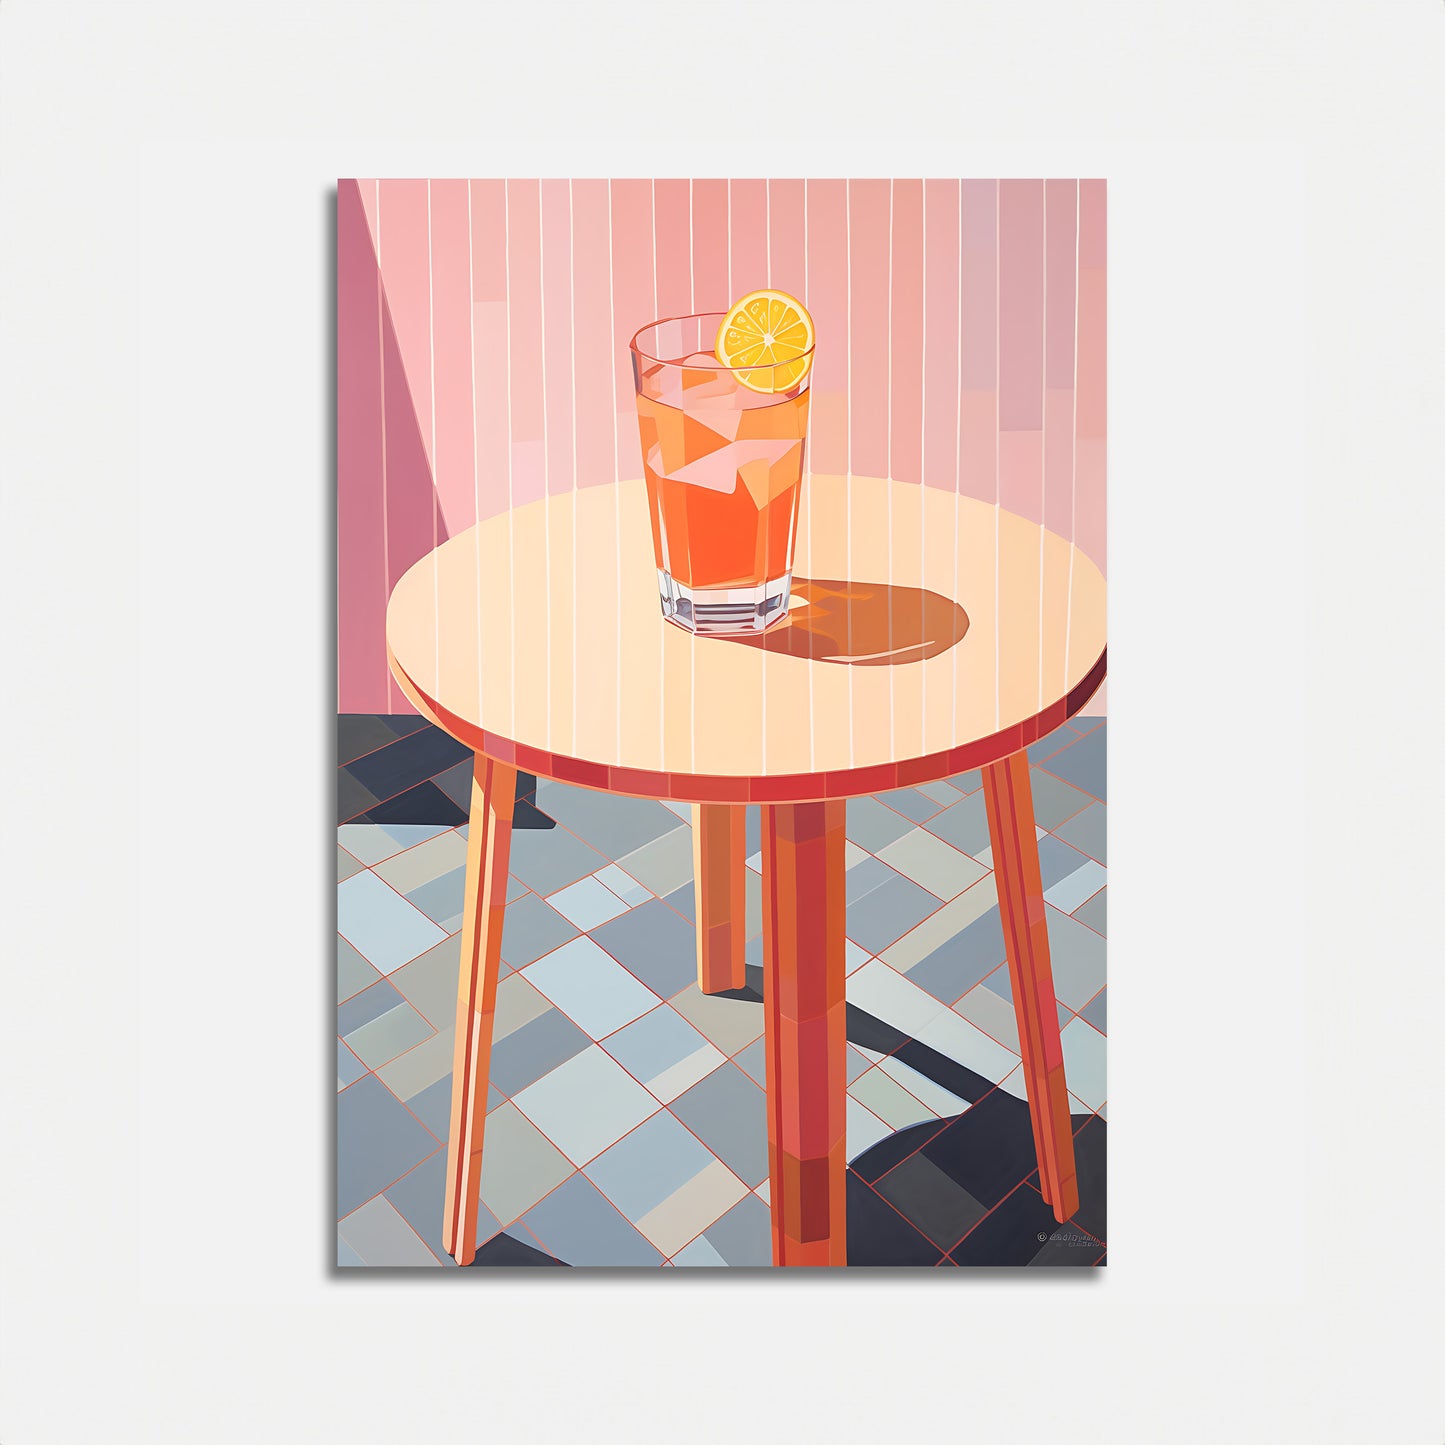 Illustration of a drink on a round table against a striped background.